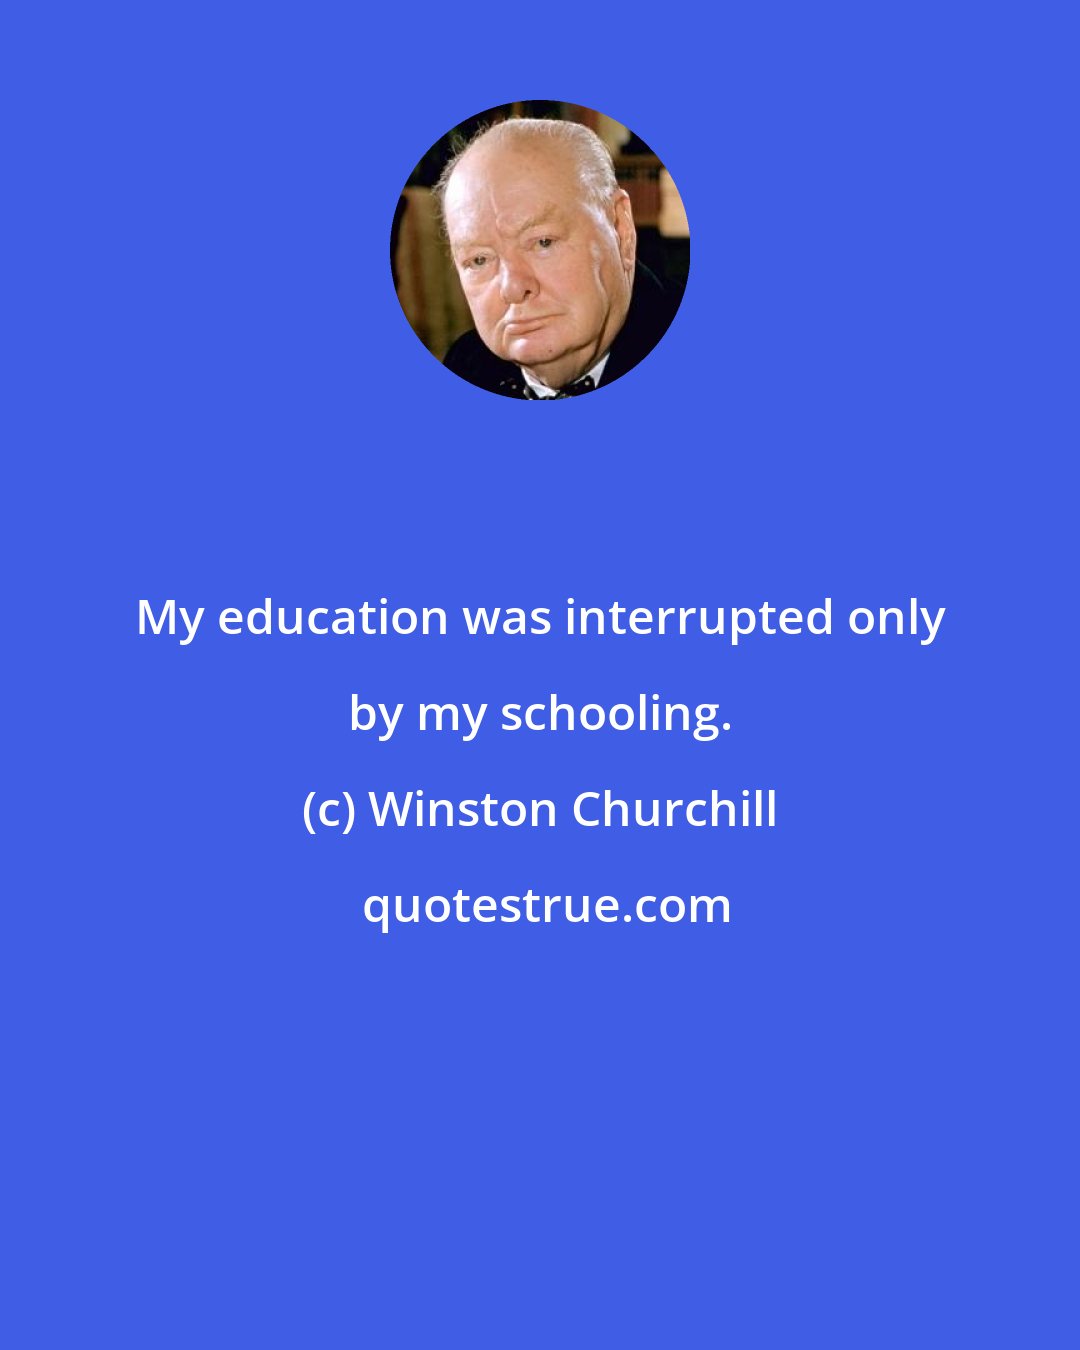 Winston Churchill: My education was interrupted only by my schooling.